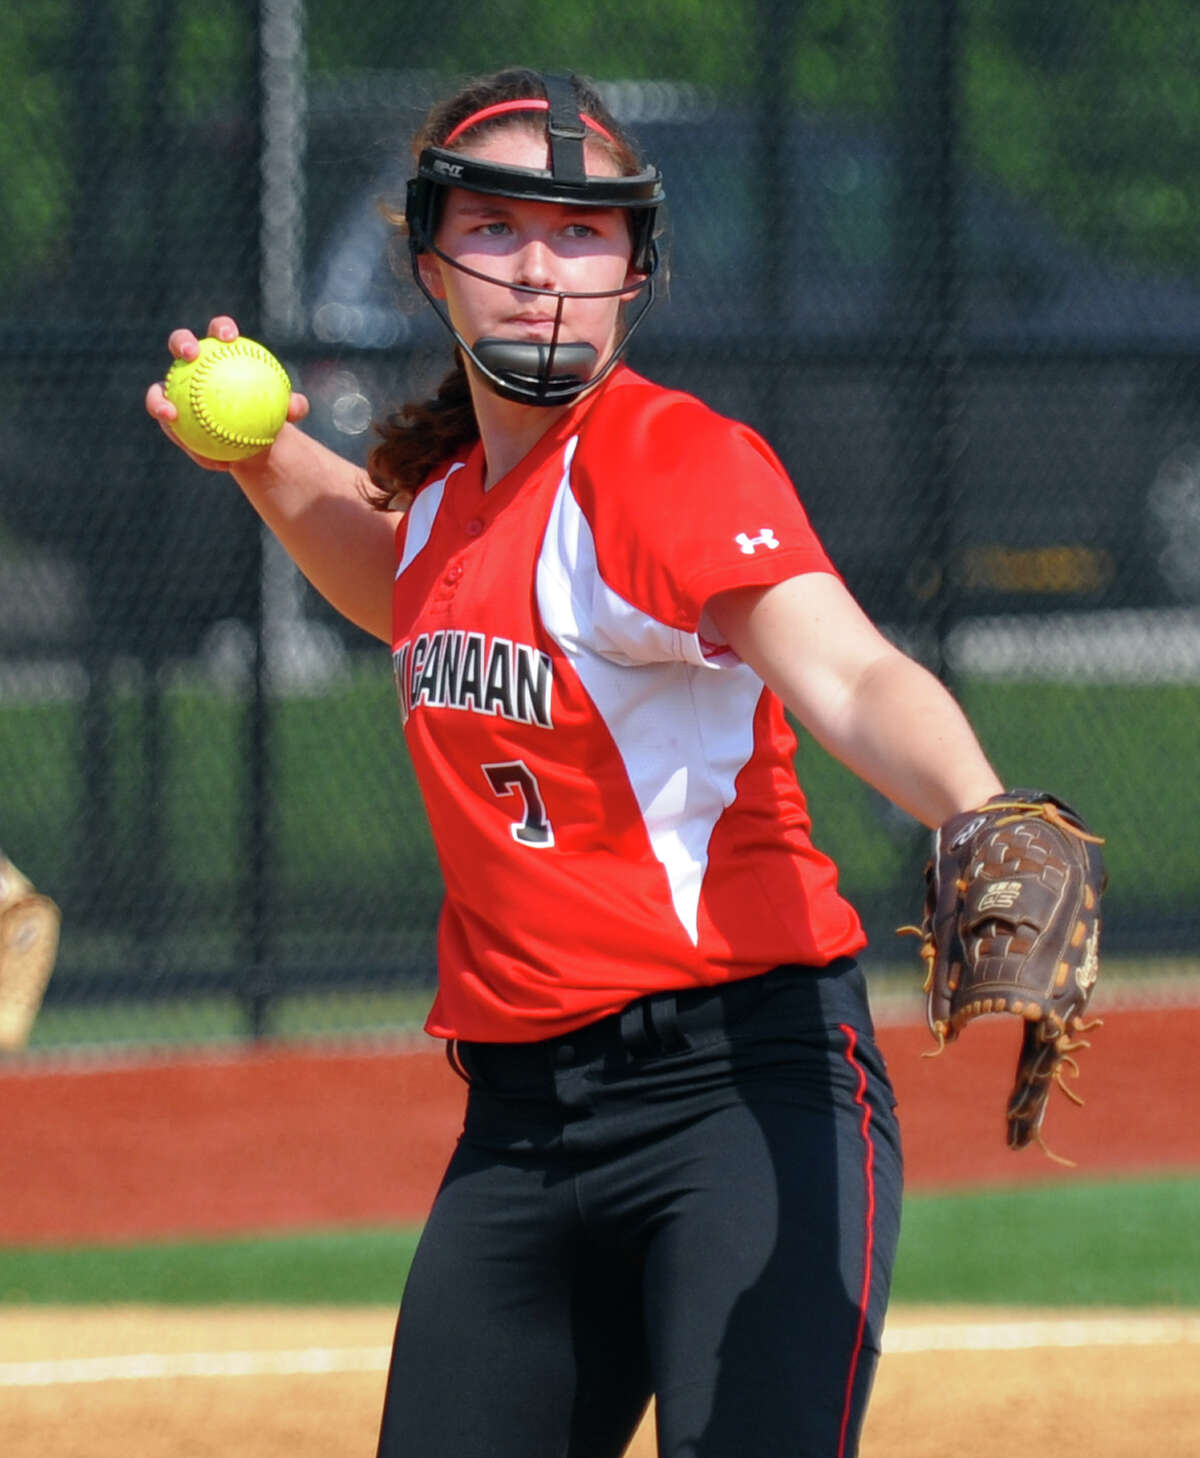 New Canaan's Ali Reilly, during FCIAC Softball Championship semi-final action against Fairfield Ludlowe at Sacred Heart University in Fairfield, Conn. on Tuesday May 21, 2013.